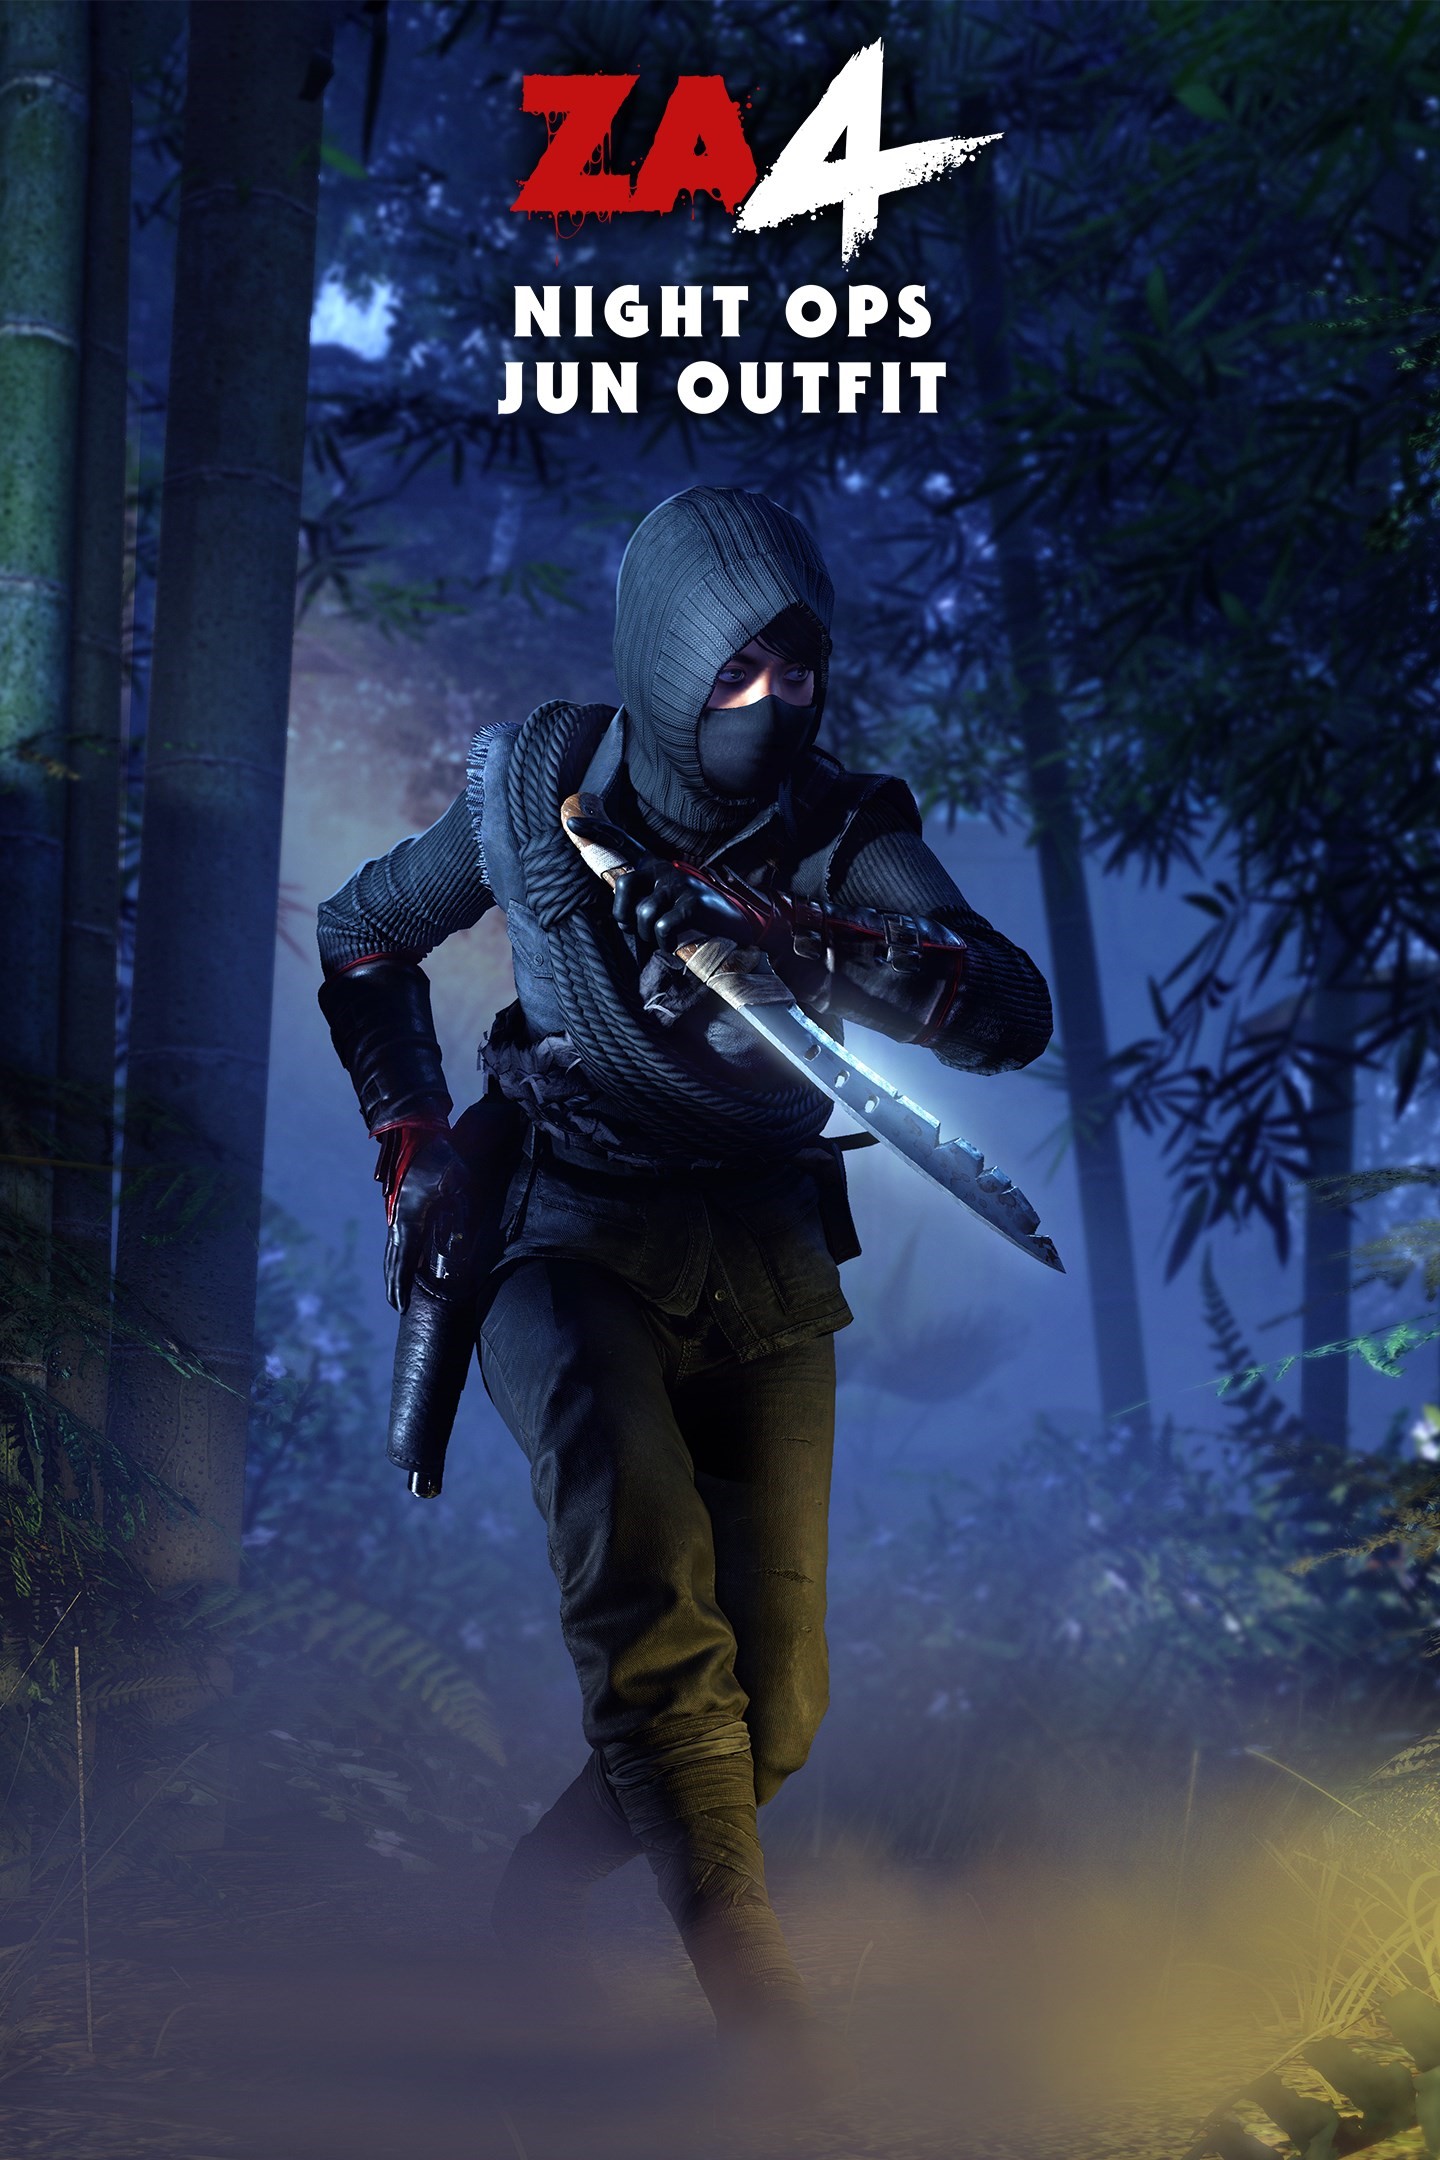 Zombie Army 4: Night Ops Jun Outfit